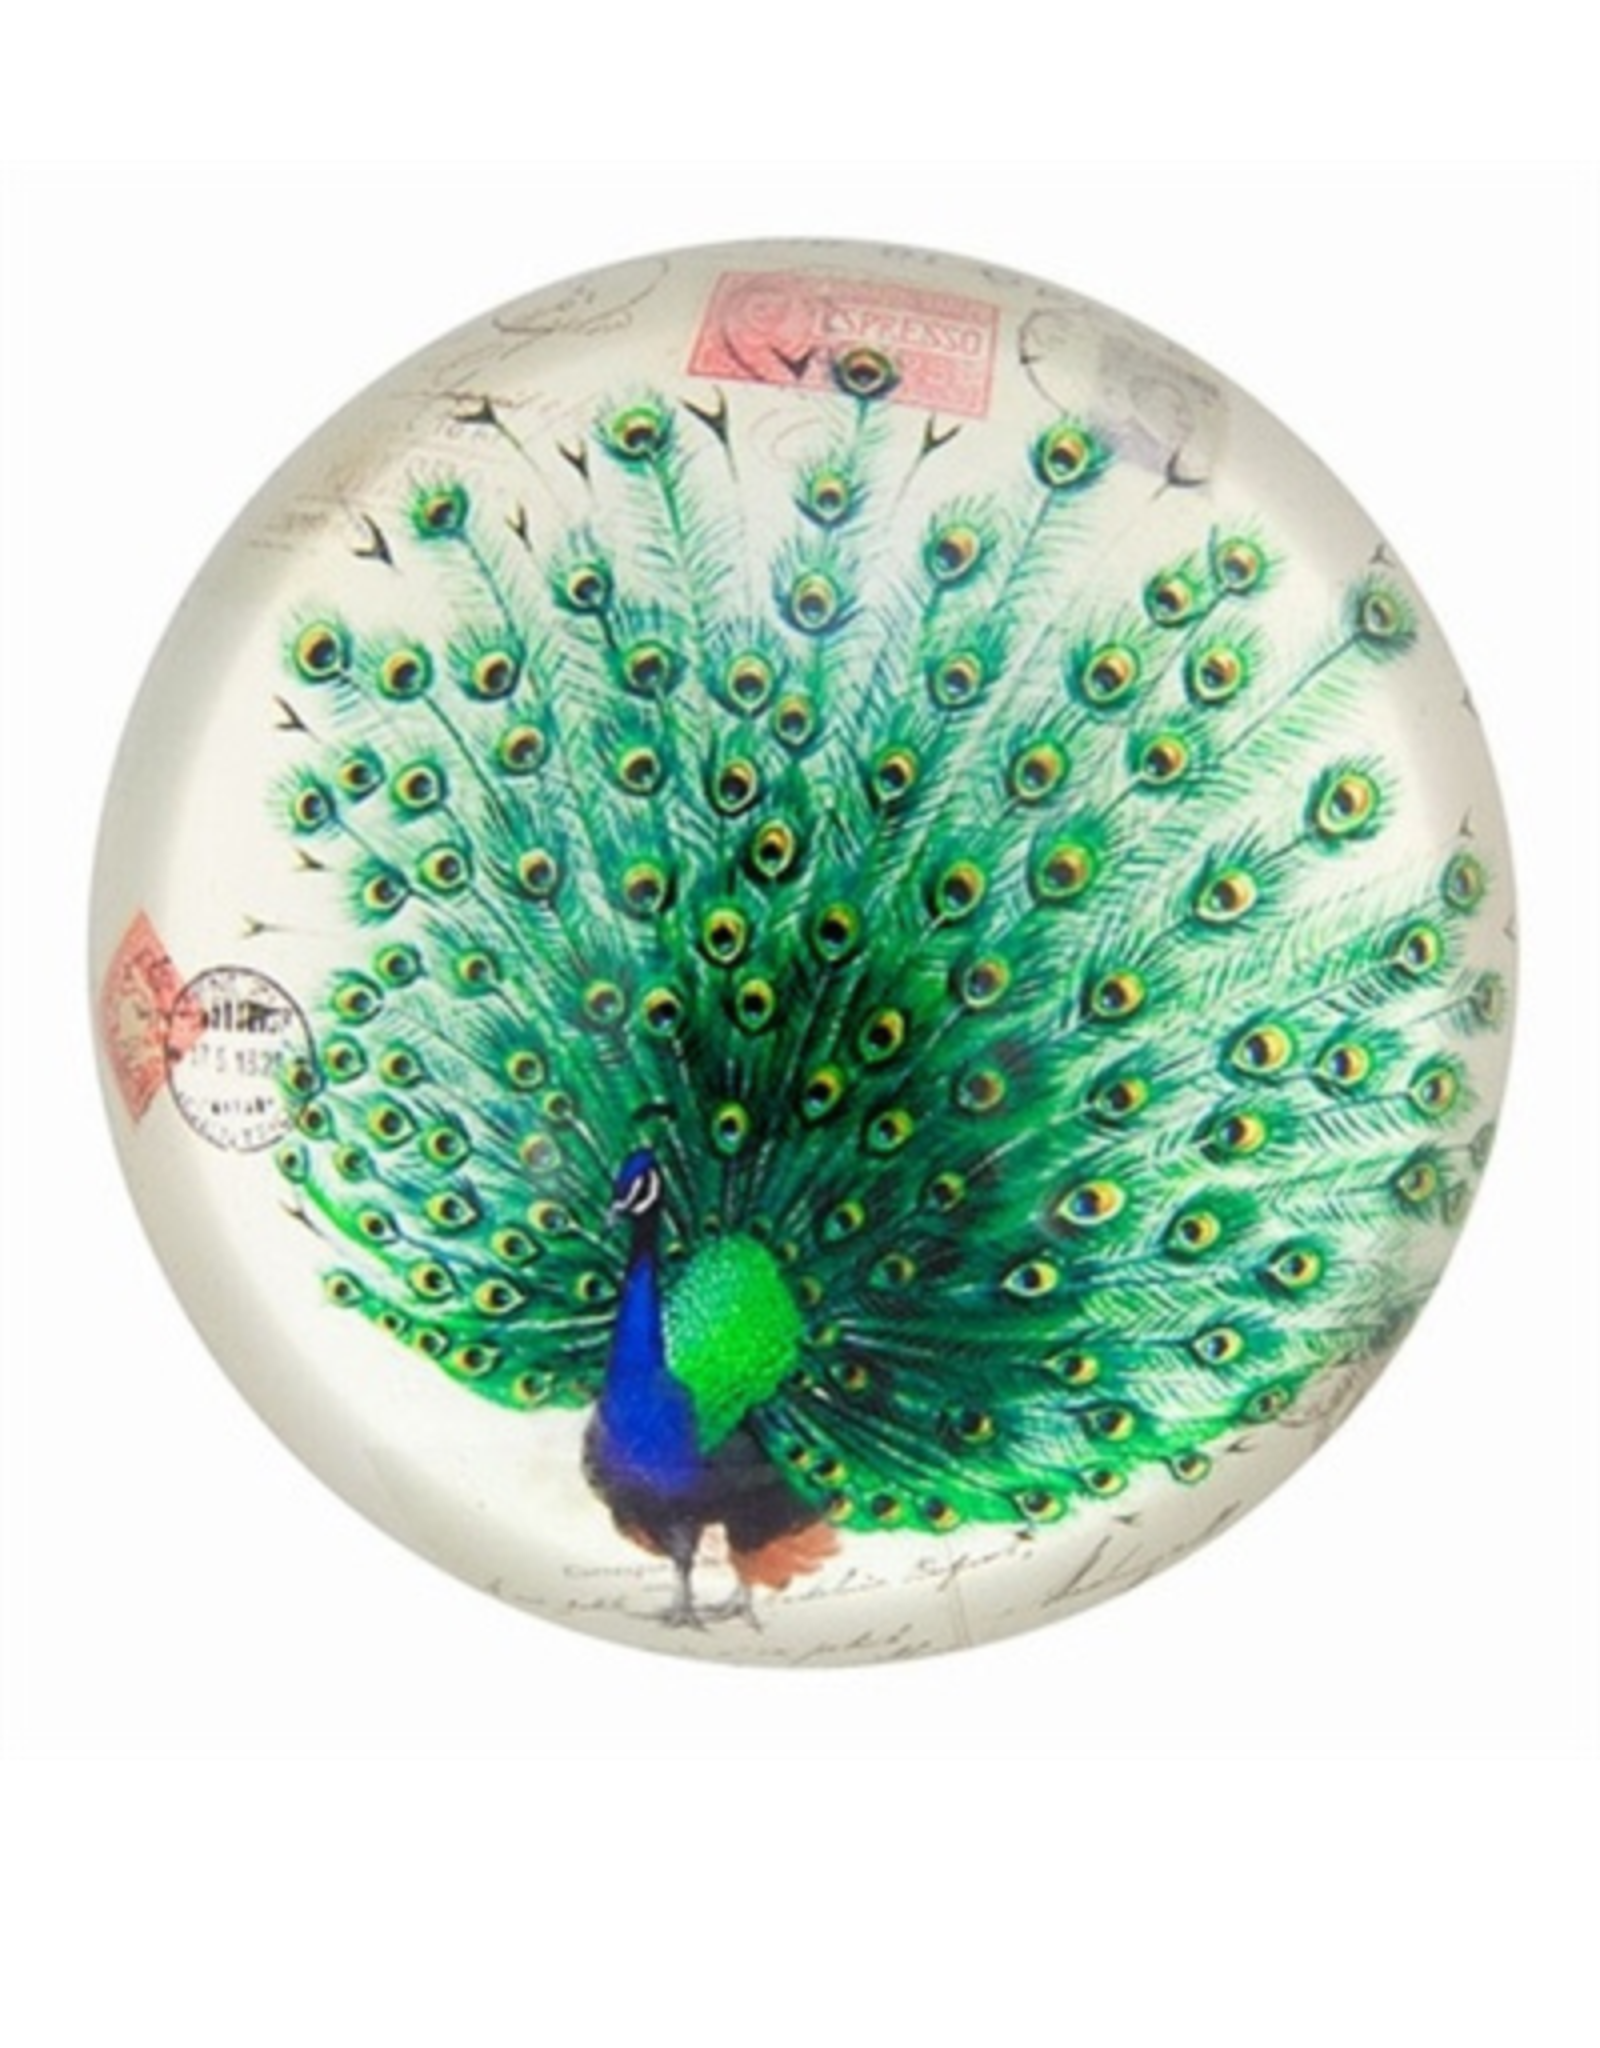 PAPERWEIGHT-GLASS DOME, PROUD PEACOCK